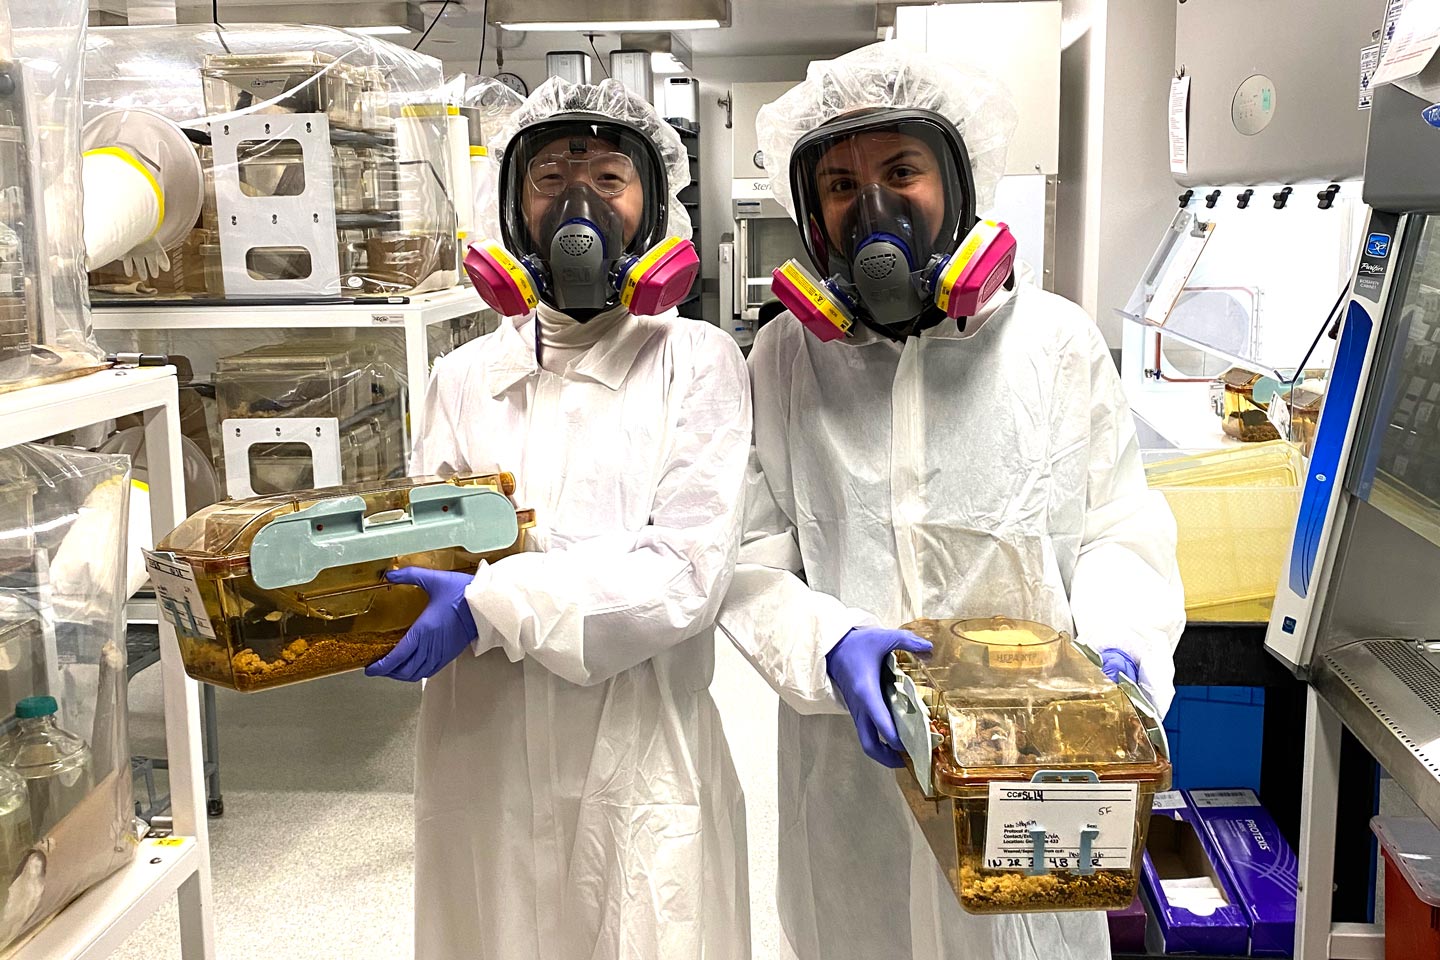 Members of the Shopsin Lab wear protective gear while working in a laboratory.